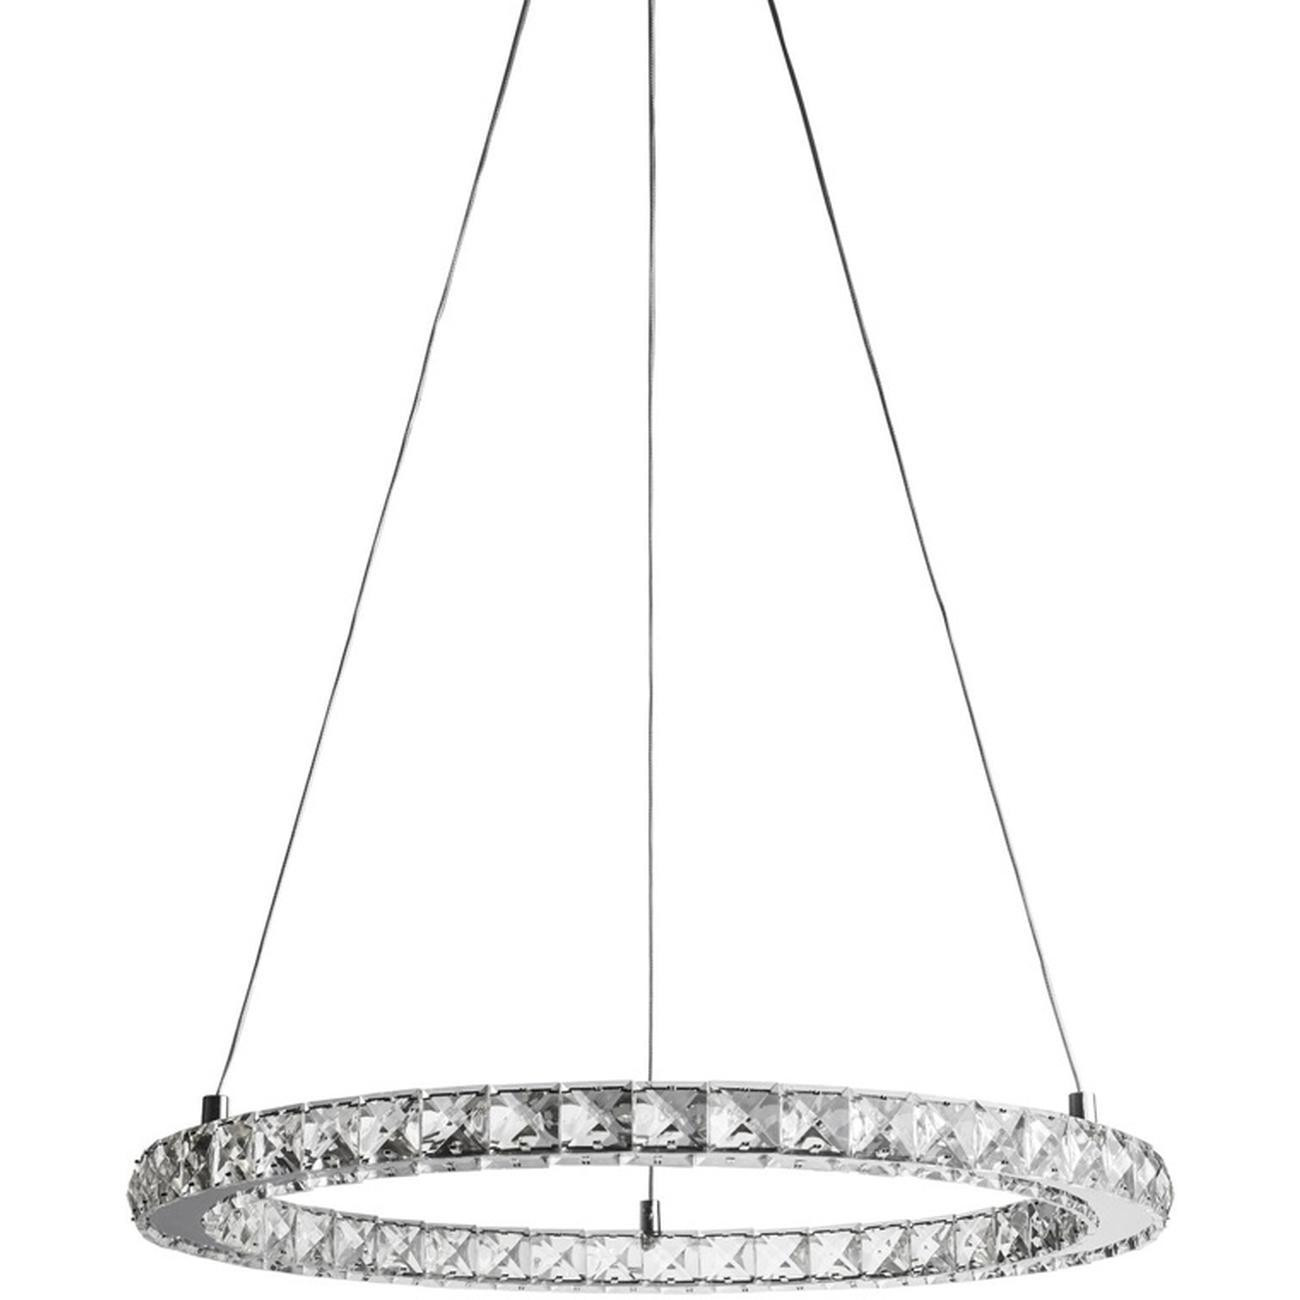 Suspension Ronde On Strass Avec Led Rondo Argent